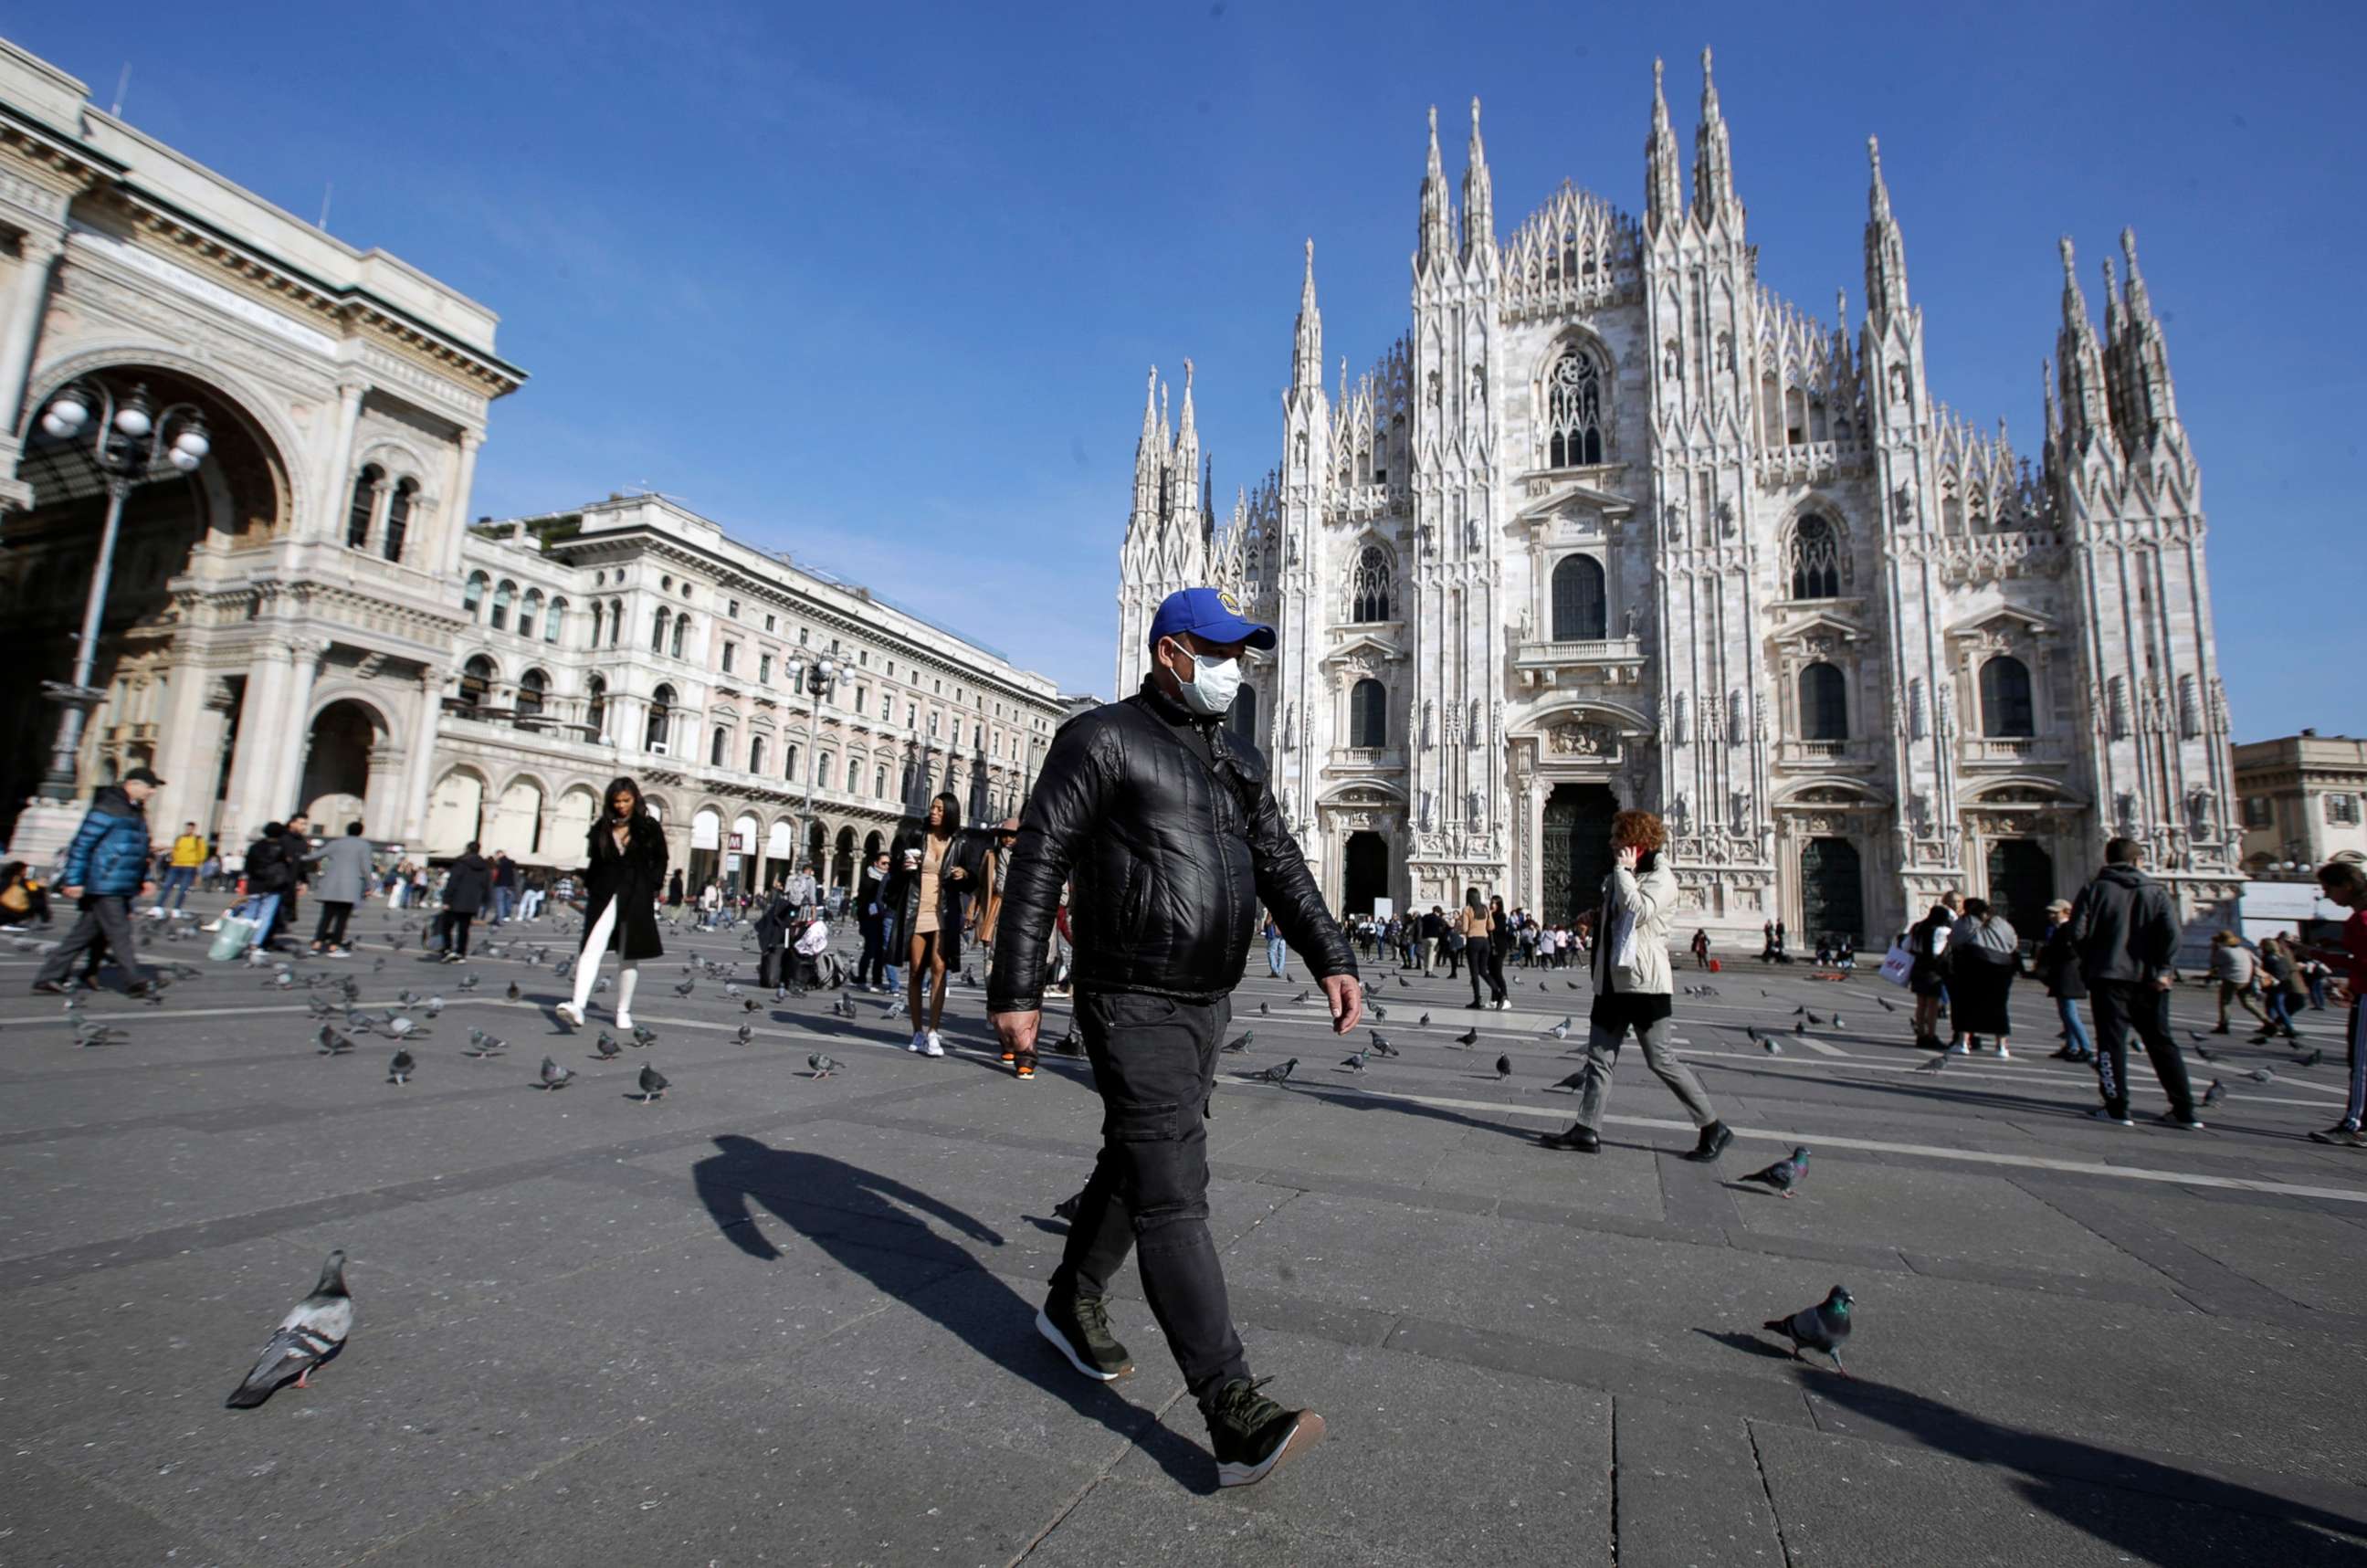 PHOTO: a man walks past the Duomo gothic cathedral in Milan, Italy.